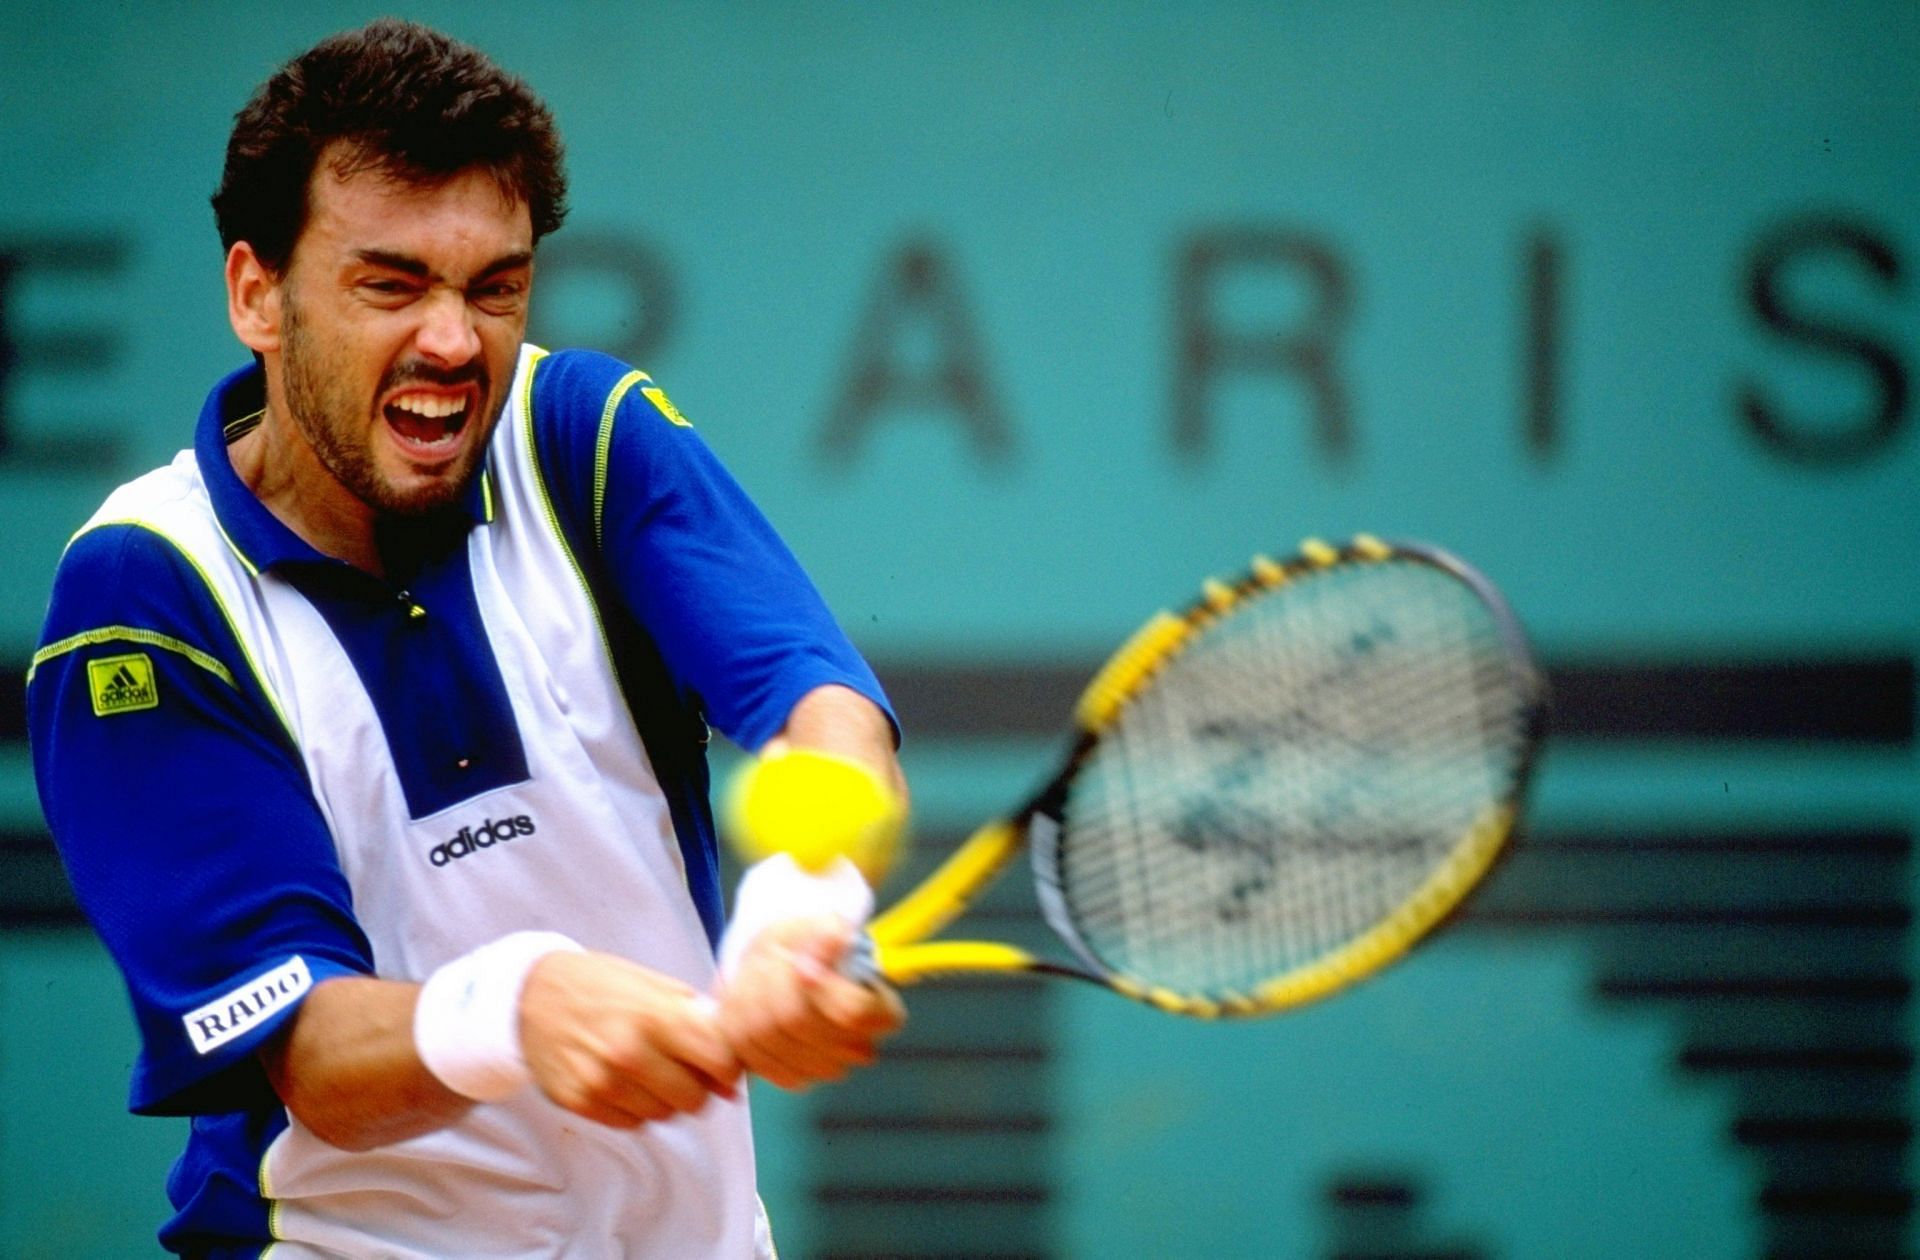 Sergi Bruguera is a two-time winner at the French Open.